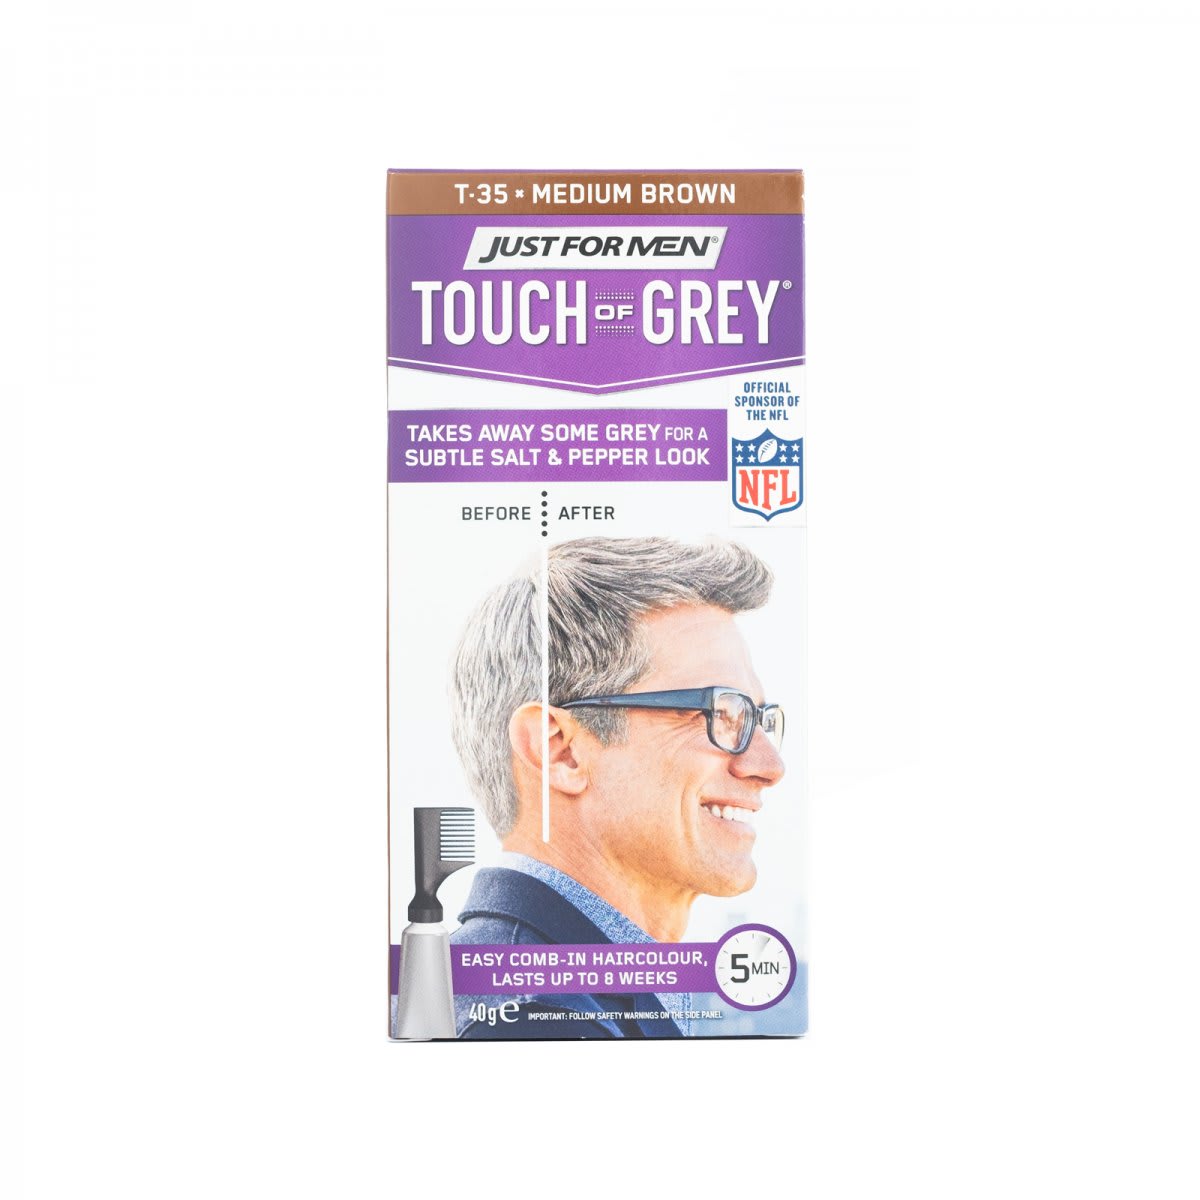 Just For Men - Touch of Grey - Medium Brown Grey